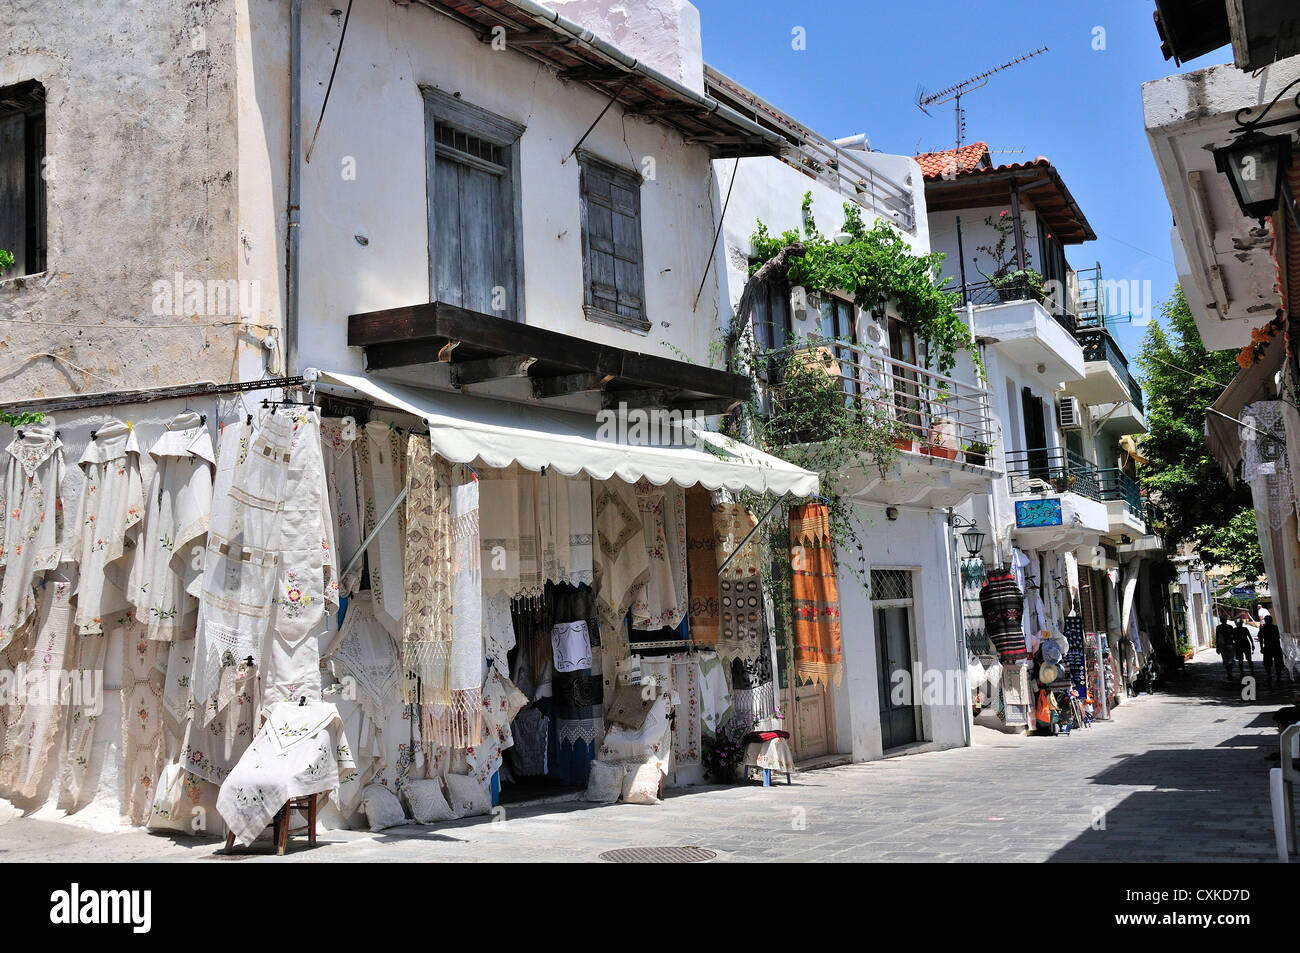 Street in Kritsa, near Agios Nikolaos, North East Coast, Crete, Greece showing village street and shop selling embroidered items Stock Photo